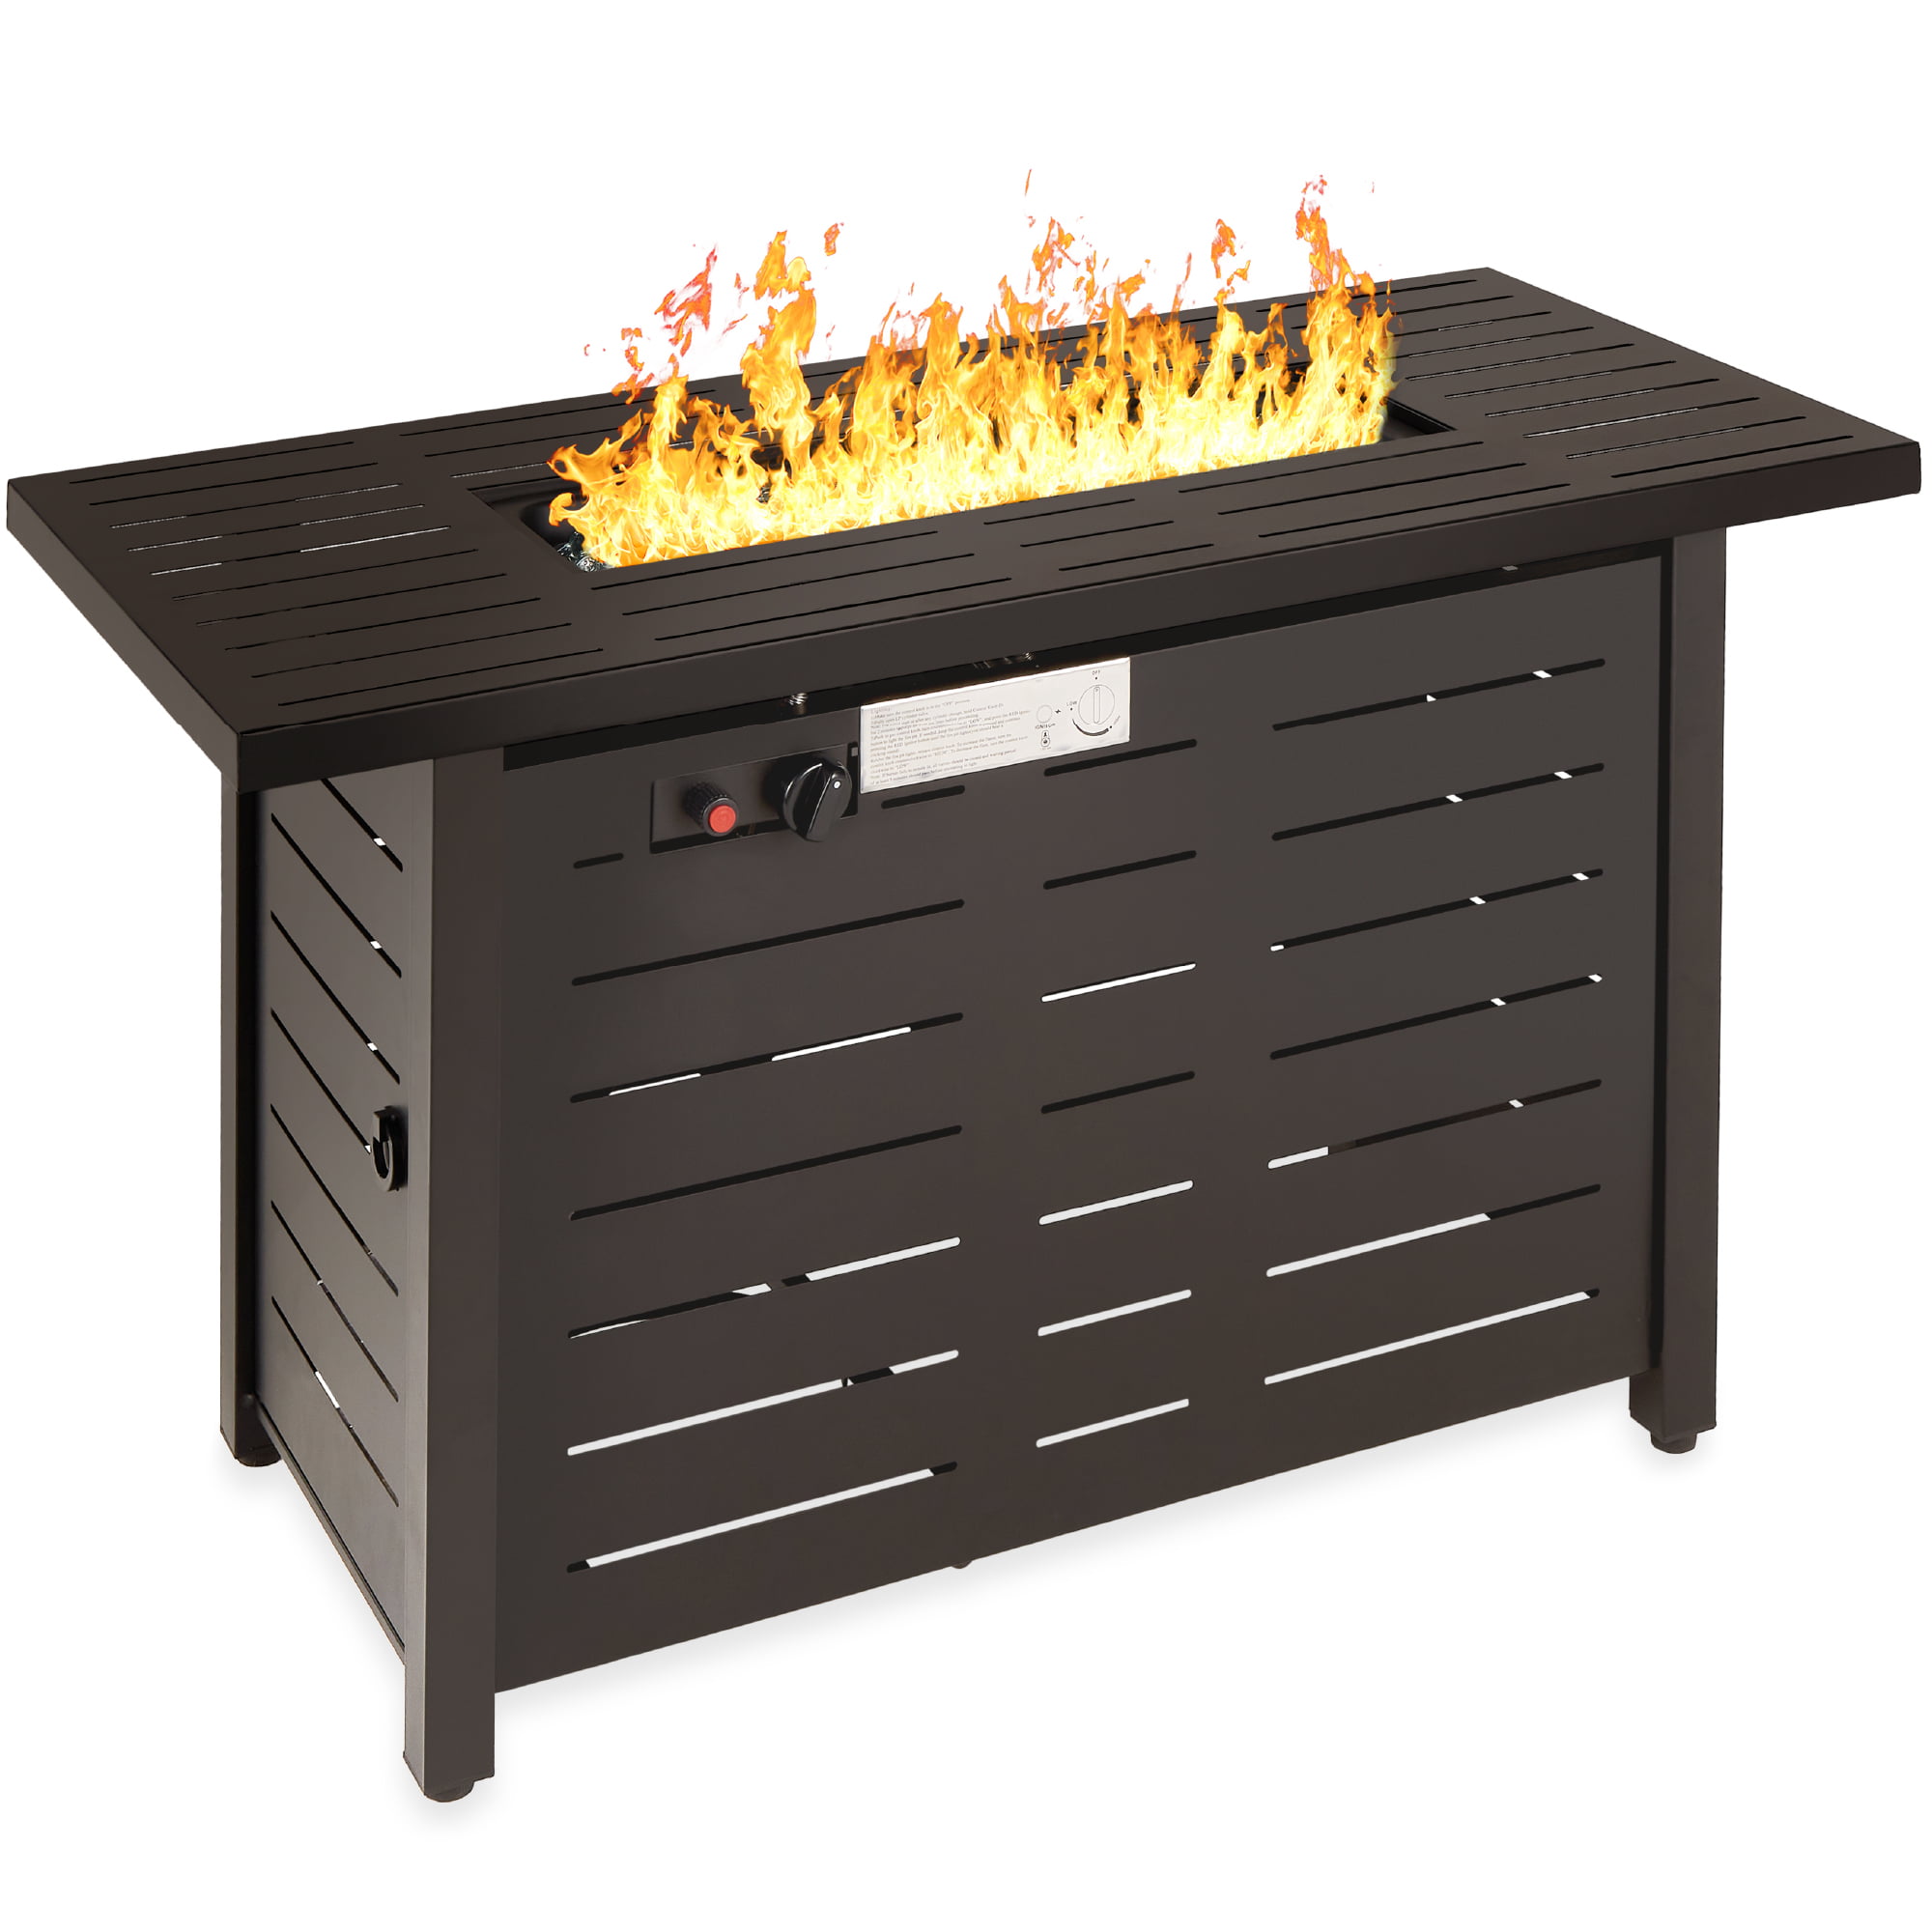 ECOTOUGE 42Inch Outdoor Propane Fire Pit Table Outdoor Furniture 50,000 BTU Rectangular Fire Table Propane Tank is Not Included w/ Weather-Resistant Wind Guard Waterproof Cover 